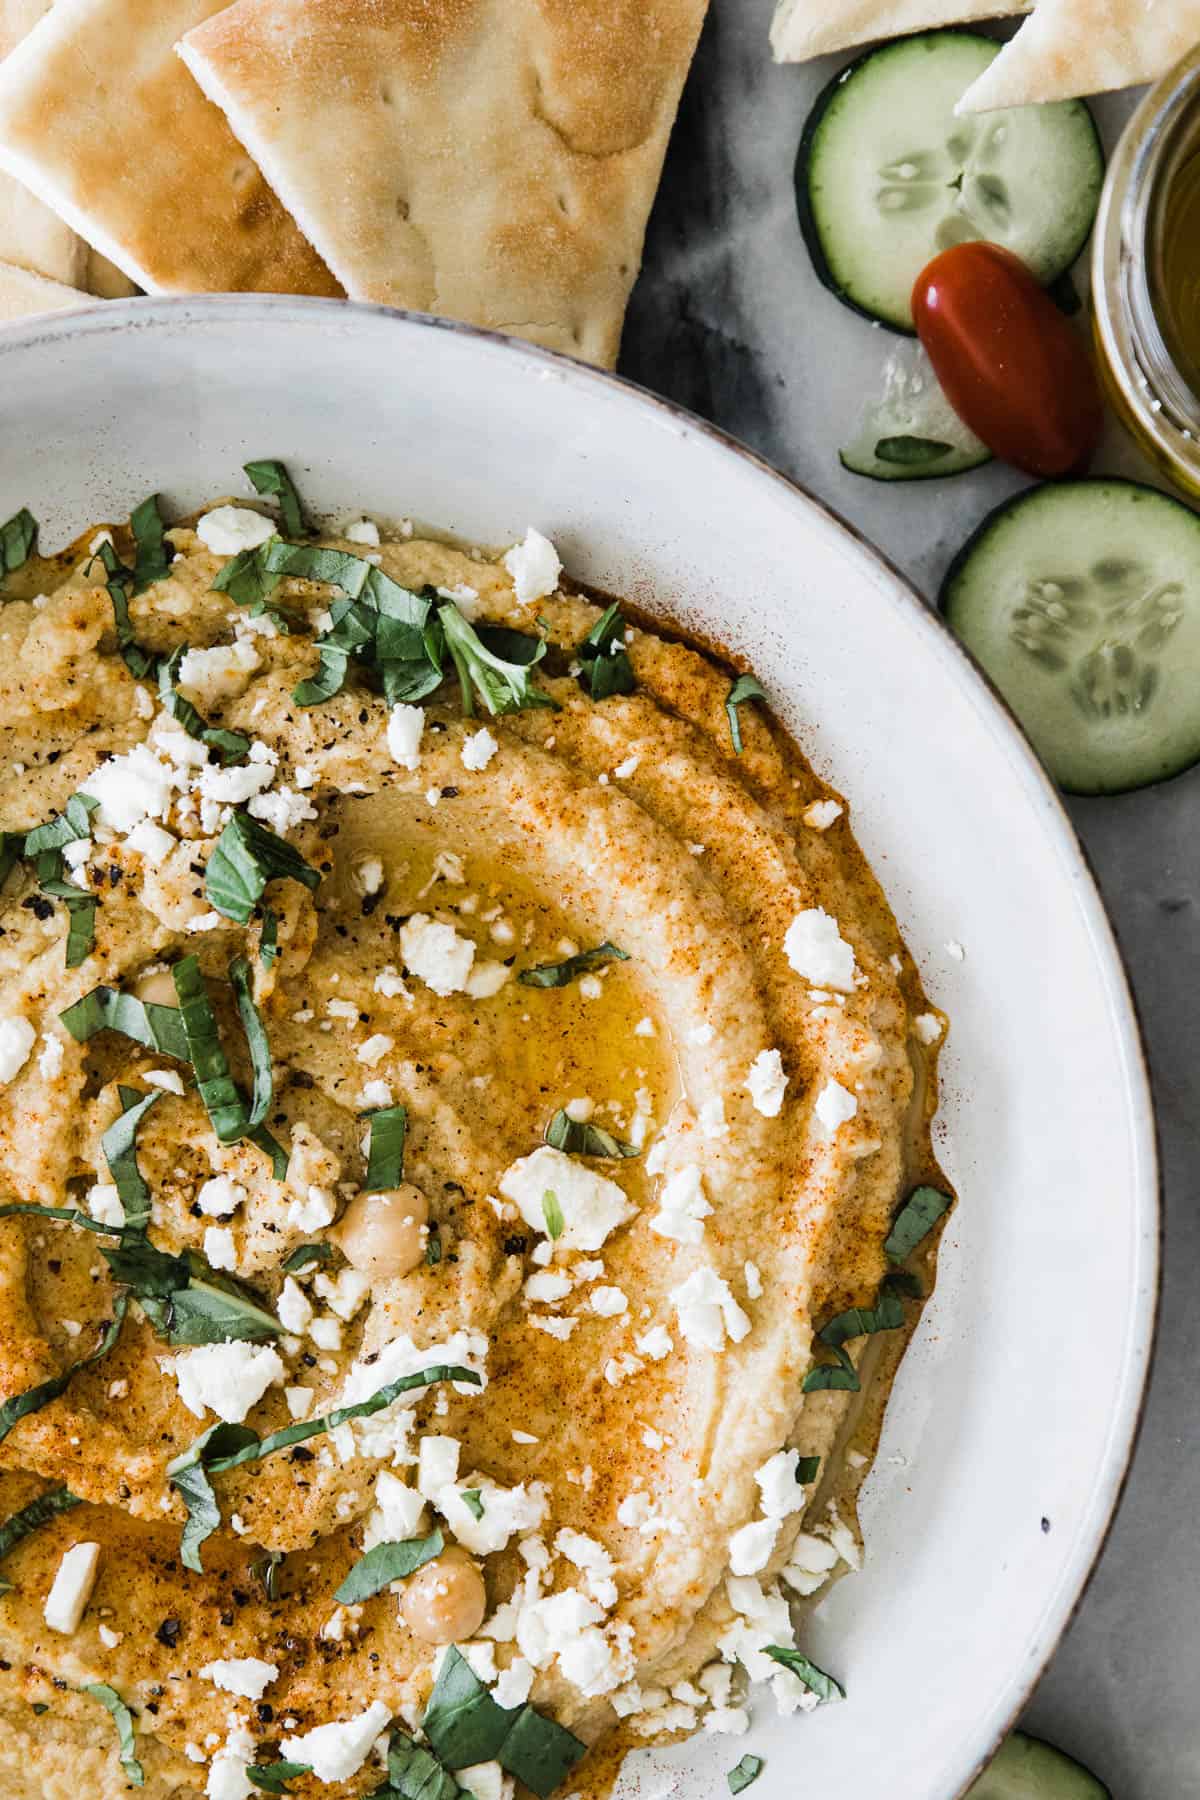 Easy hummus in a bowl topped with flakes of cheese, chopped herbs, and cracked pepper.